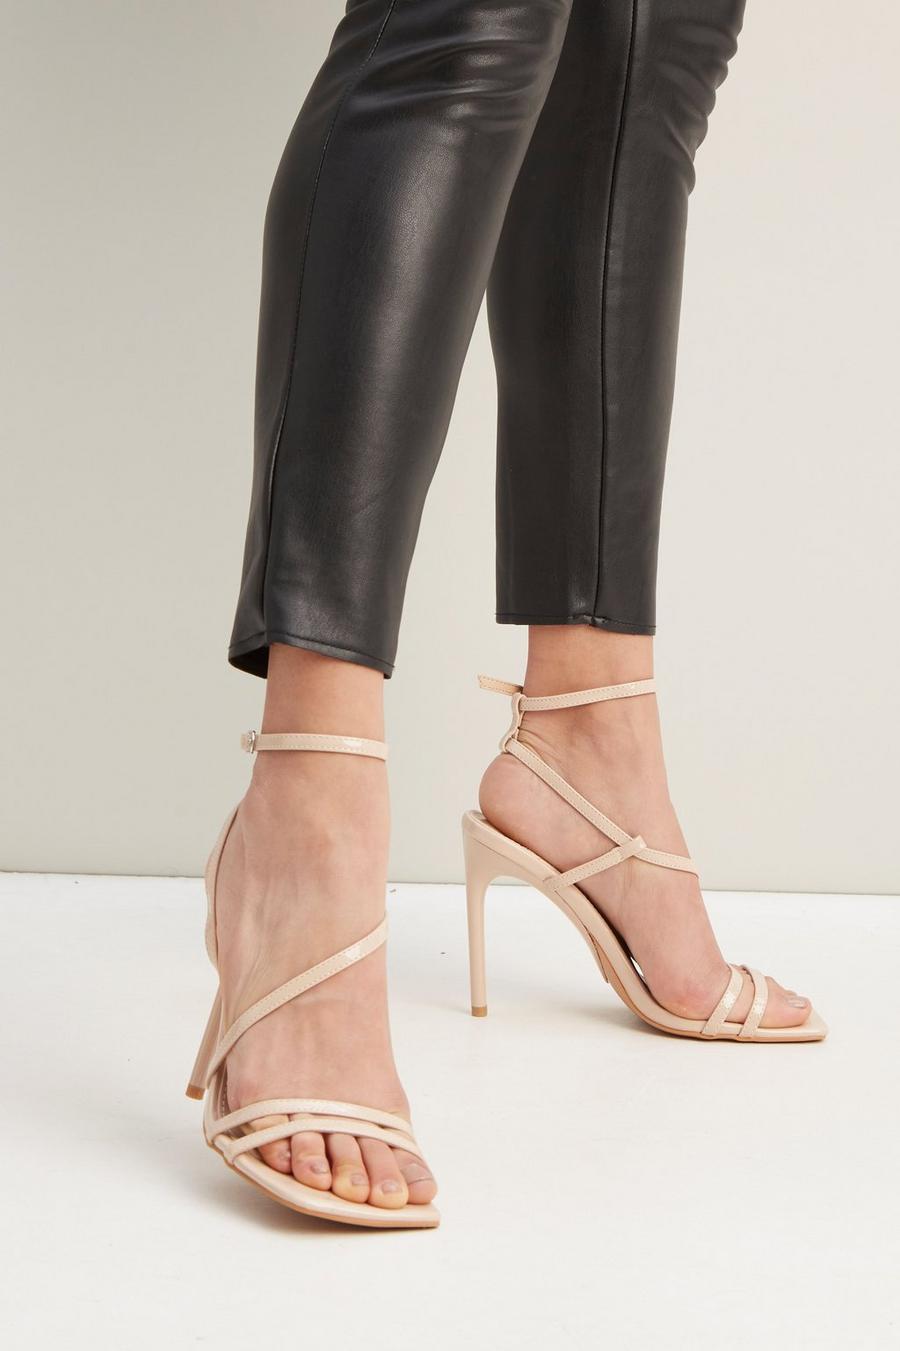 Gianna Strappy Heeled Sandals